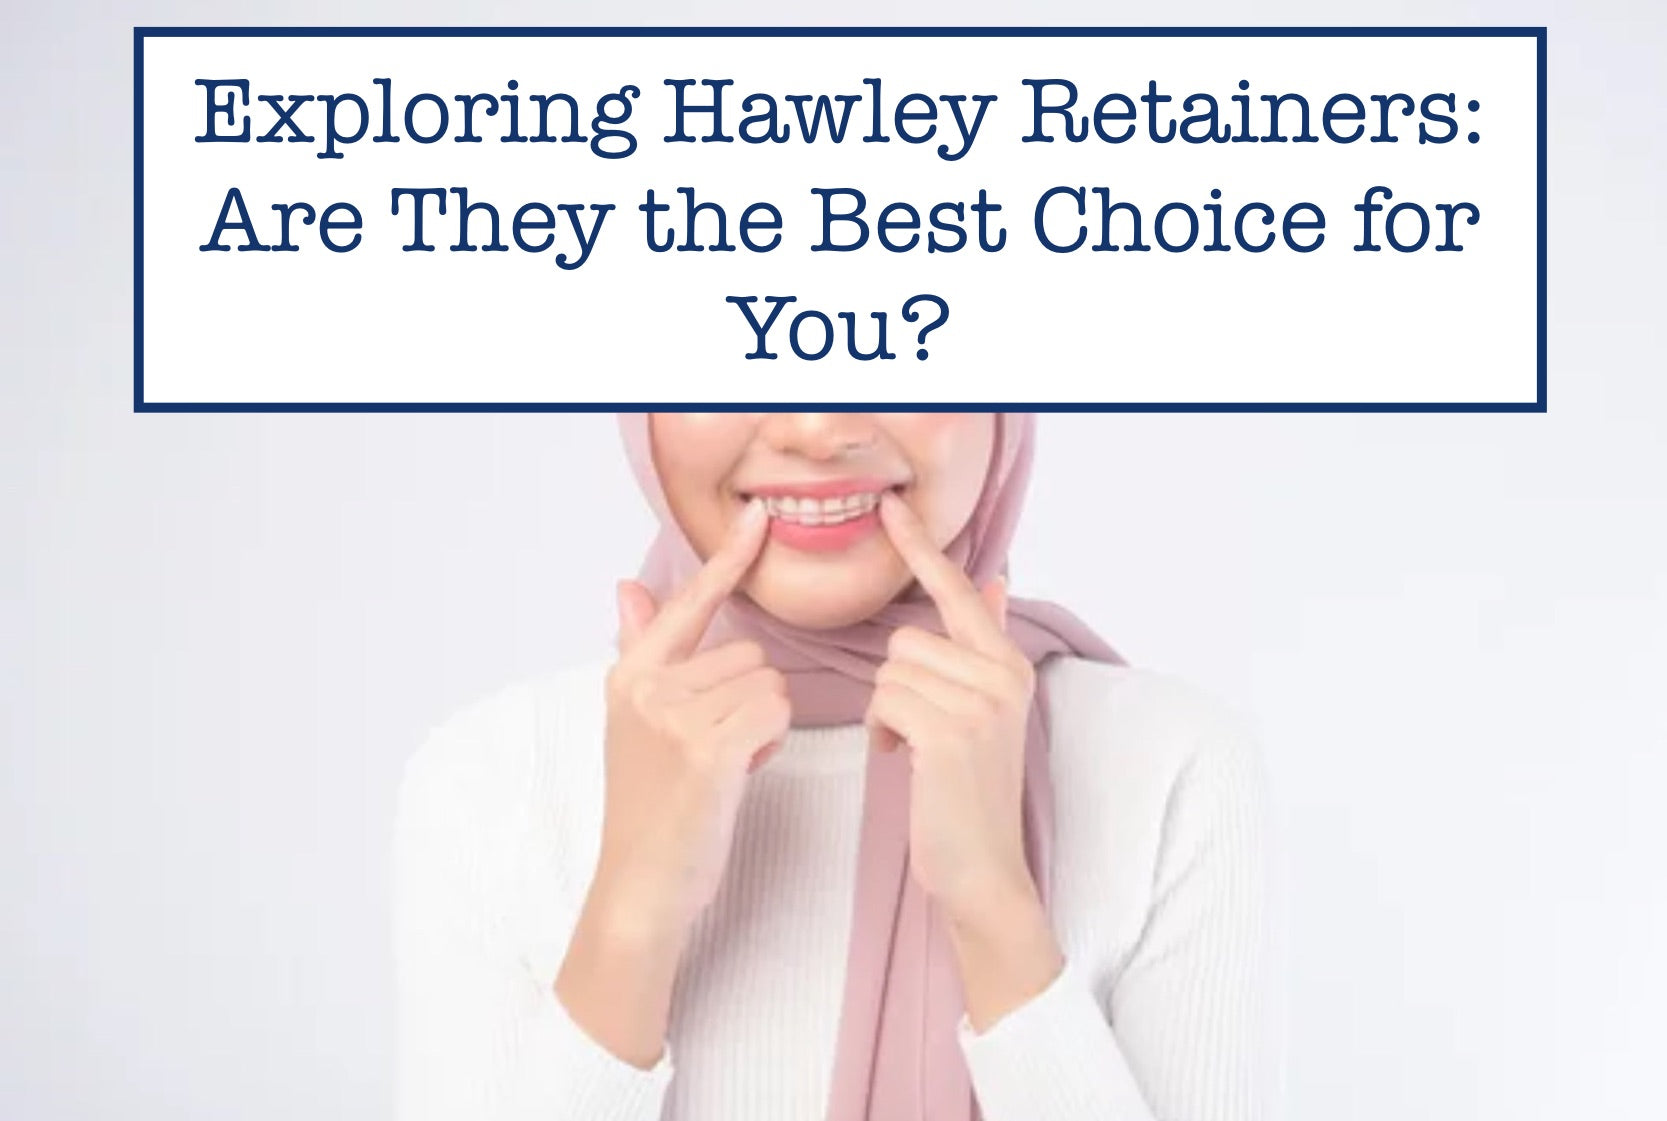 Is It Worth It? A Closer Look at the Pros and Cons of Hawley Retainers